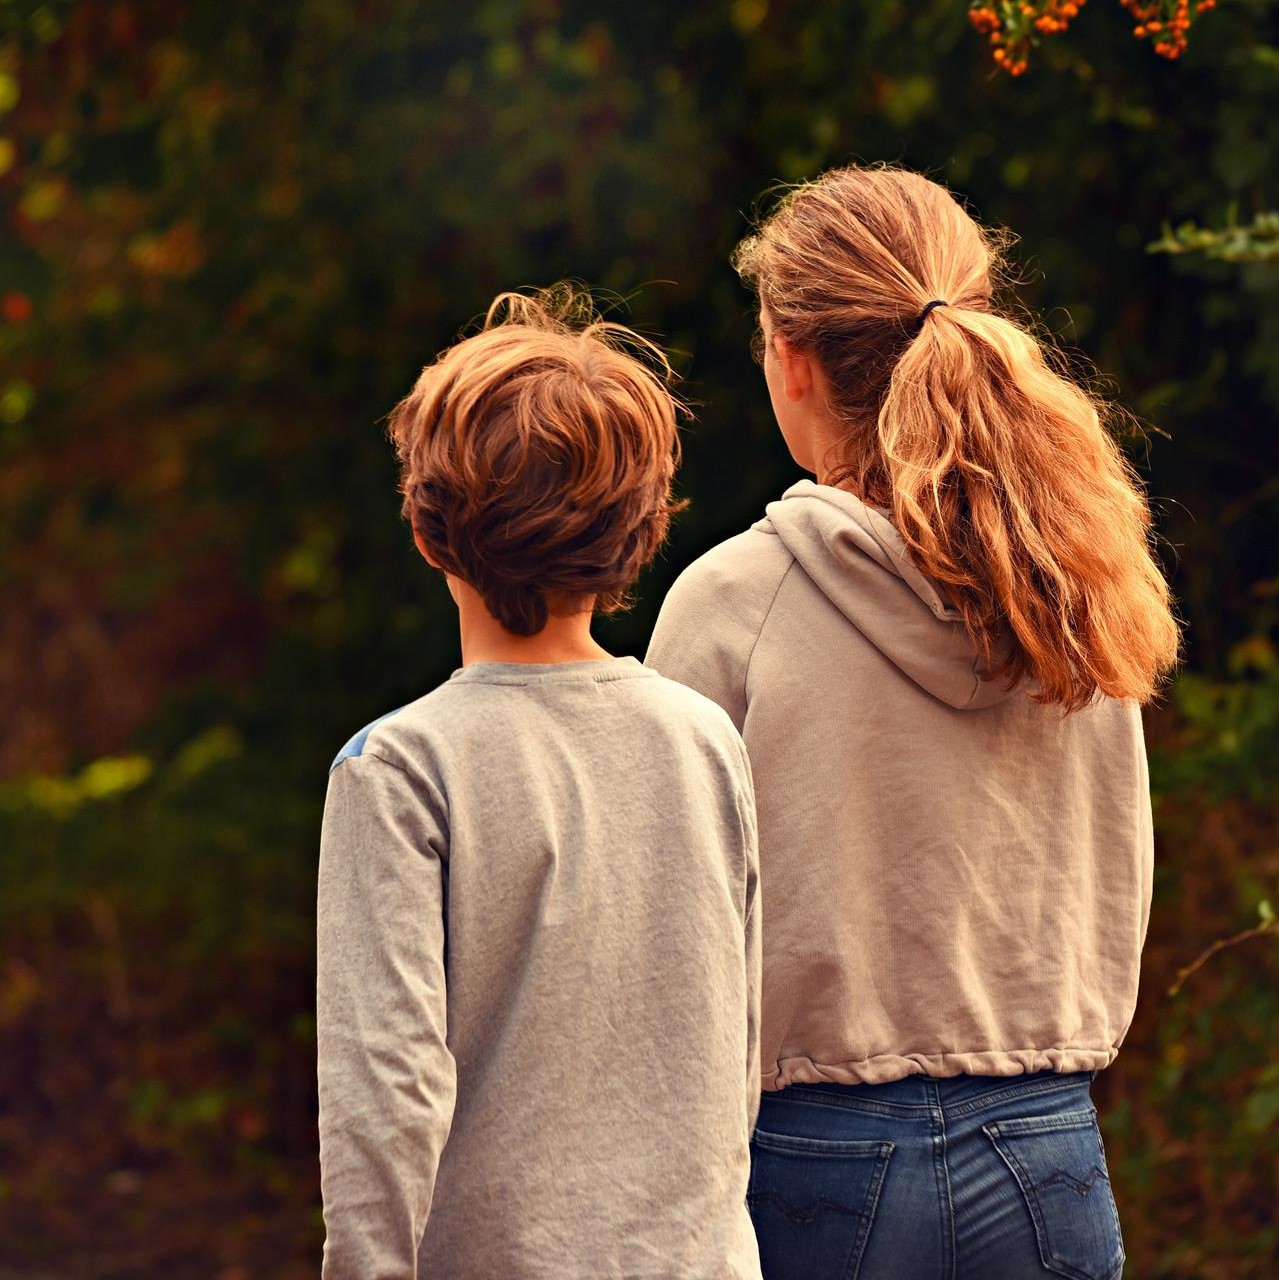 Photo of two children walking away from the camera. The one on the left is shorter, with short hair, and the one on the right is taller and has long hair in a ponytail.